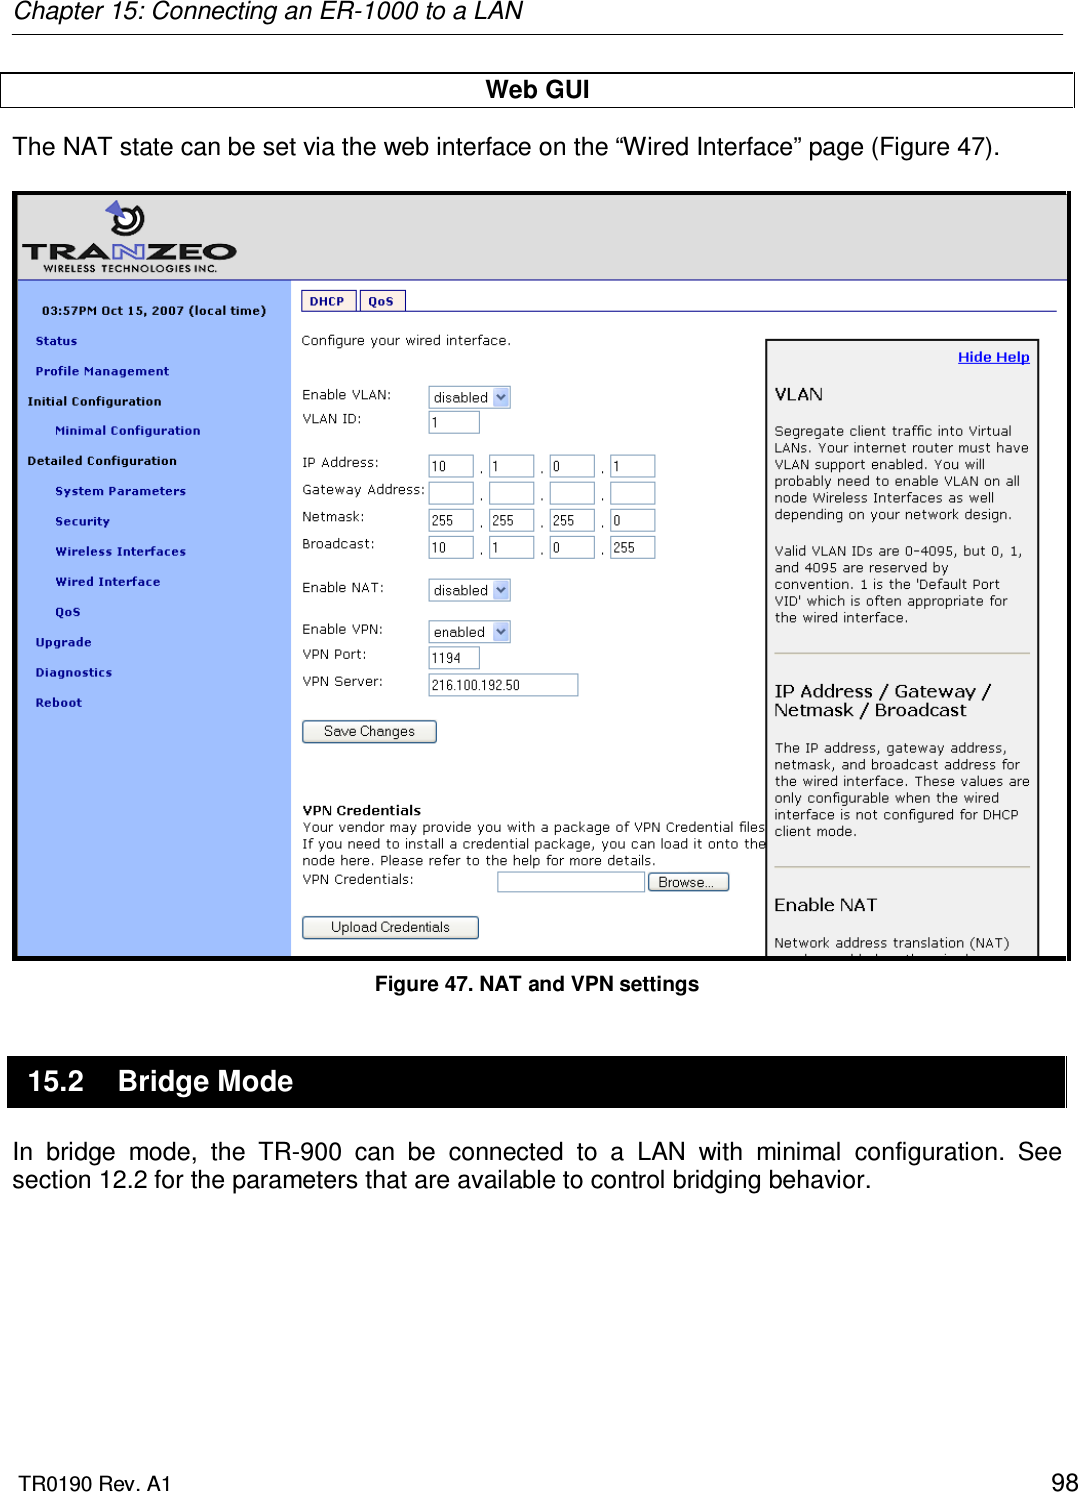 Chapter 15: Connecting an ER-1000 to a LAN  TR0190 Rev. A1    98 Web GUI The NAT state can be set via the web interface on the “Wired Interface” page (Figure 47).   Figure 47. NAT and VPN settings 15.2  Bridge Mode In  bridge  mode,  the  TR-900  can  be  connected  to  a  LAN  with  minimal  configuration.  See section 12.2 for the parameters that are available to control bridging behavior.  